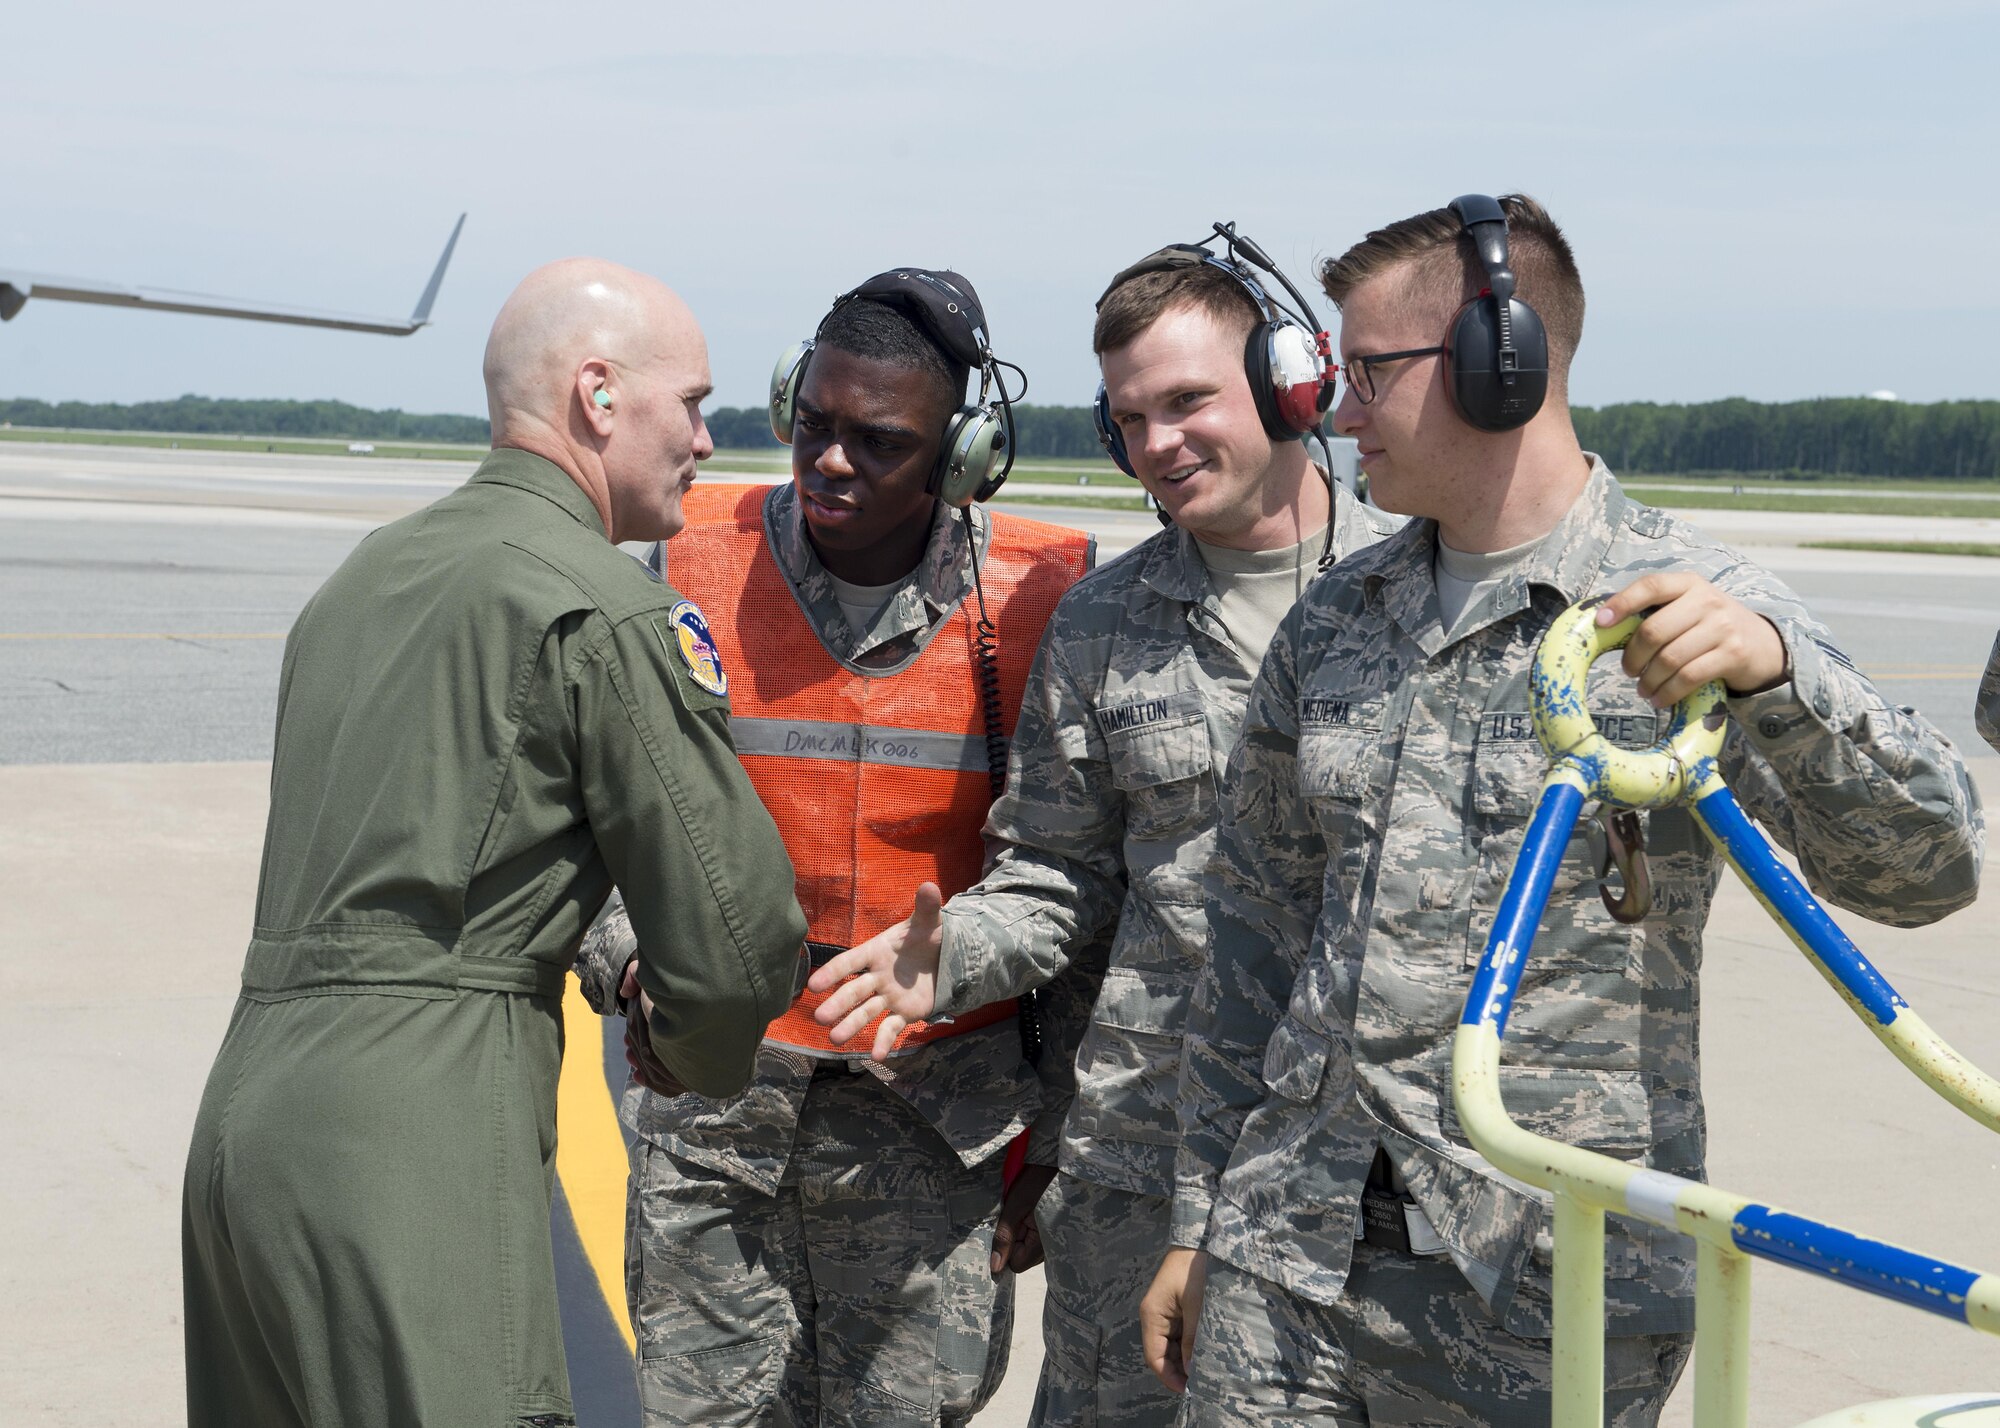 Gen. Carlton D. Everhart II, Air Mobility Command commander, meets with Airmen from the 736th Aircraft Maintenance Squadron, July 12, 2017, at Dover Air Force Base, Del. The 736th AMXS provides maintenance to Team Dover’s C-17 Globemaster III fleet. (U.S. Air Force photo by Senior Airman Zachary Cacicia)